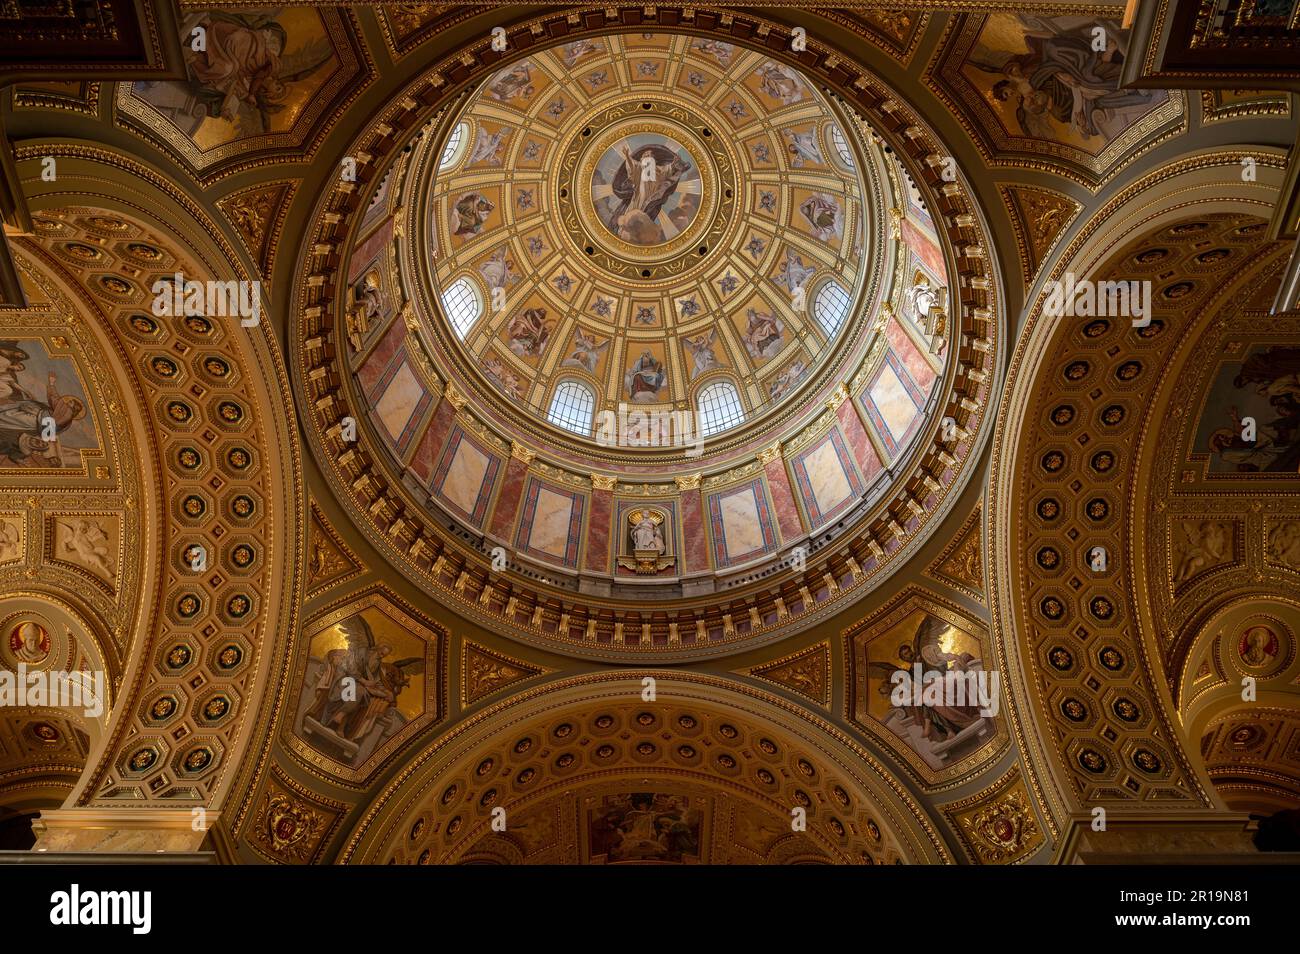 Dome of Saint Stephen Basilica in the centre of Budapest, capital city of Hungary. Interior view of the main dome in the catholic cathedral. Stock Photo